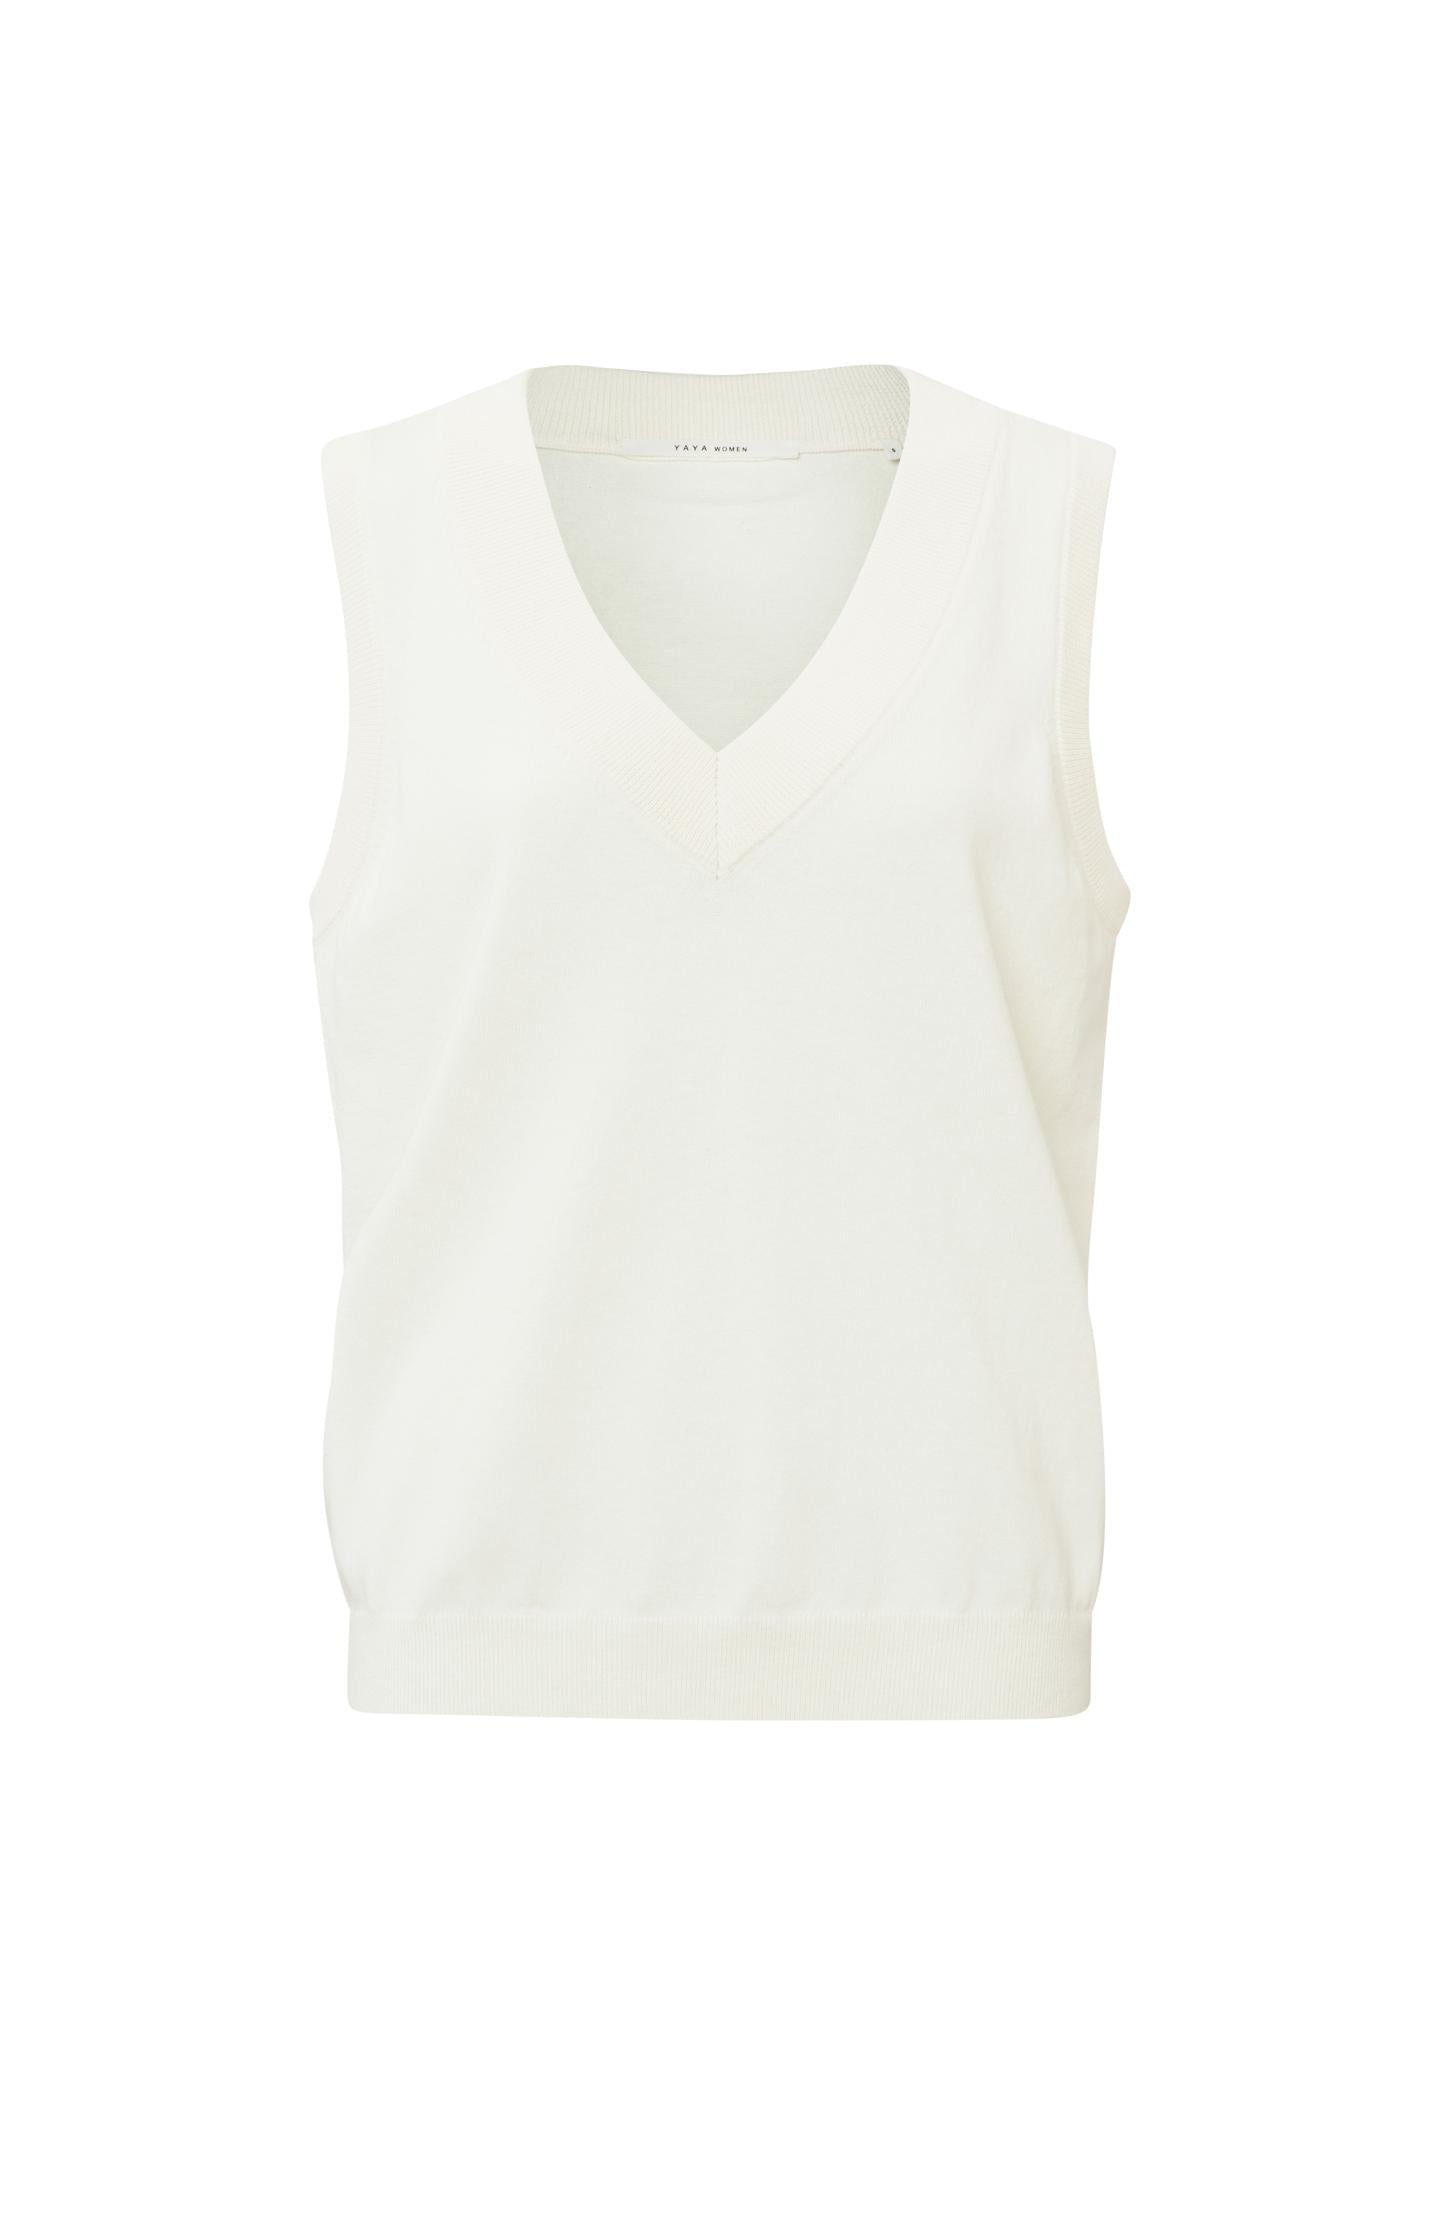 Sleeveless sweater with V-neck and ribbed waistband - Type: product